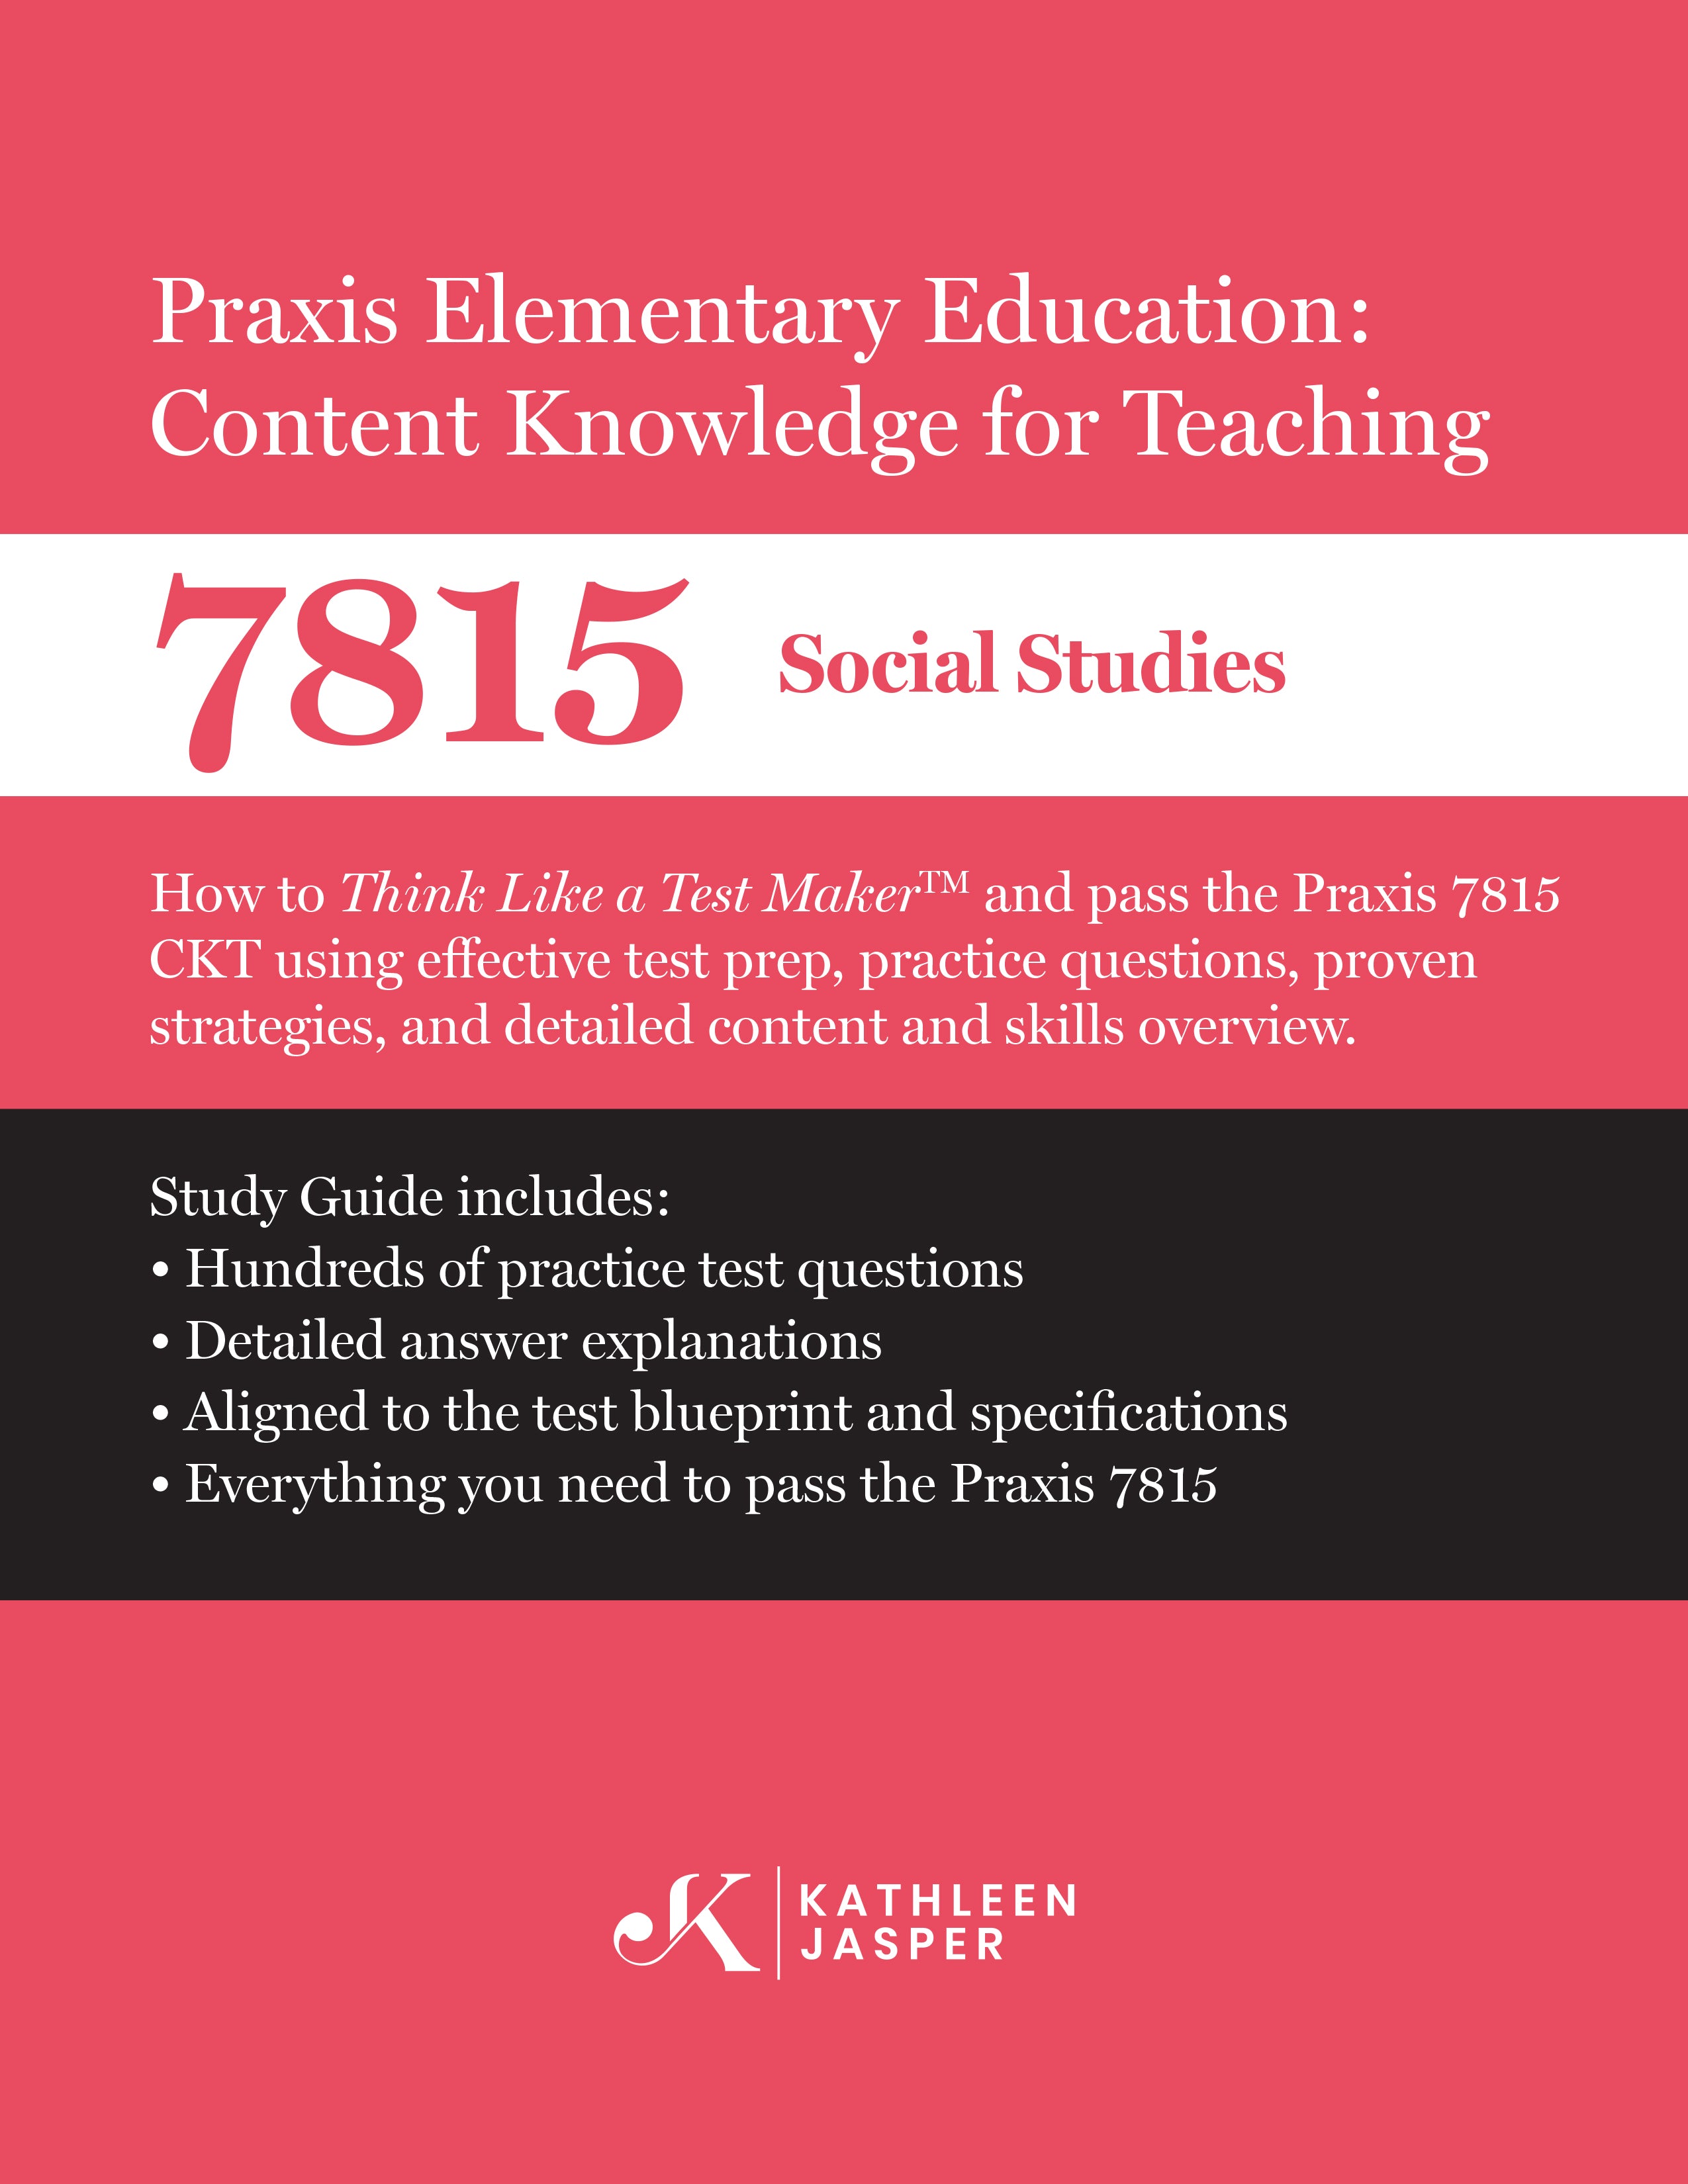 Praxis II Elementary Education Content Knowledge for Teaching (CKT) 7815 - Social Studies